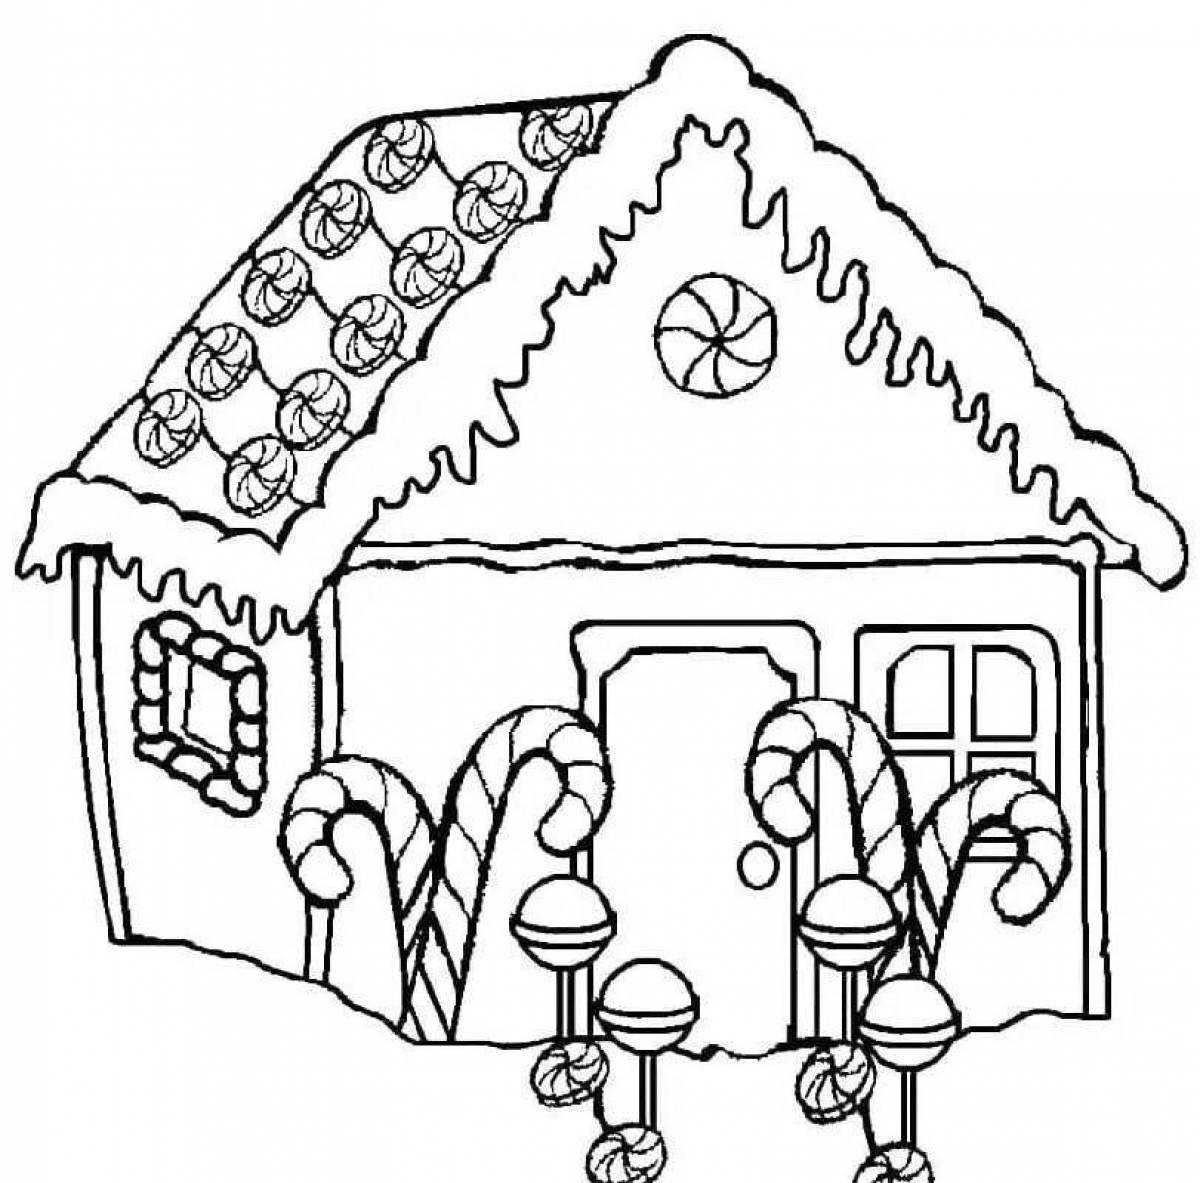 Playful gingerbread house coloring book for kids